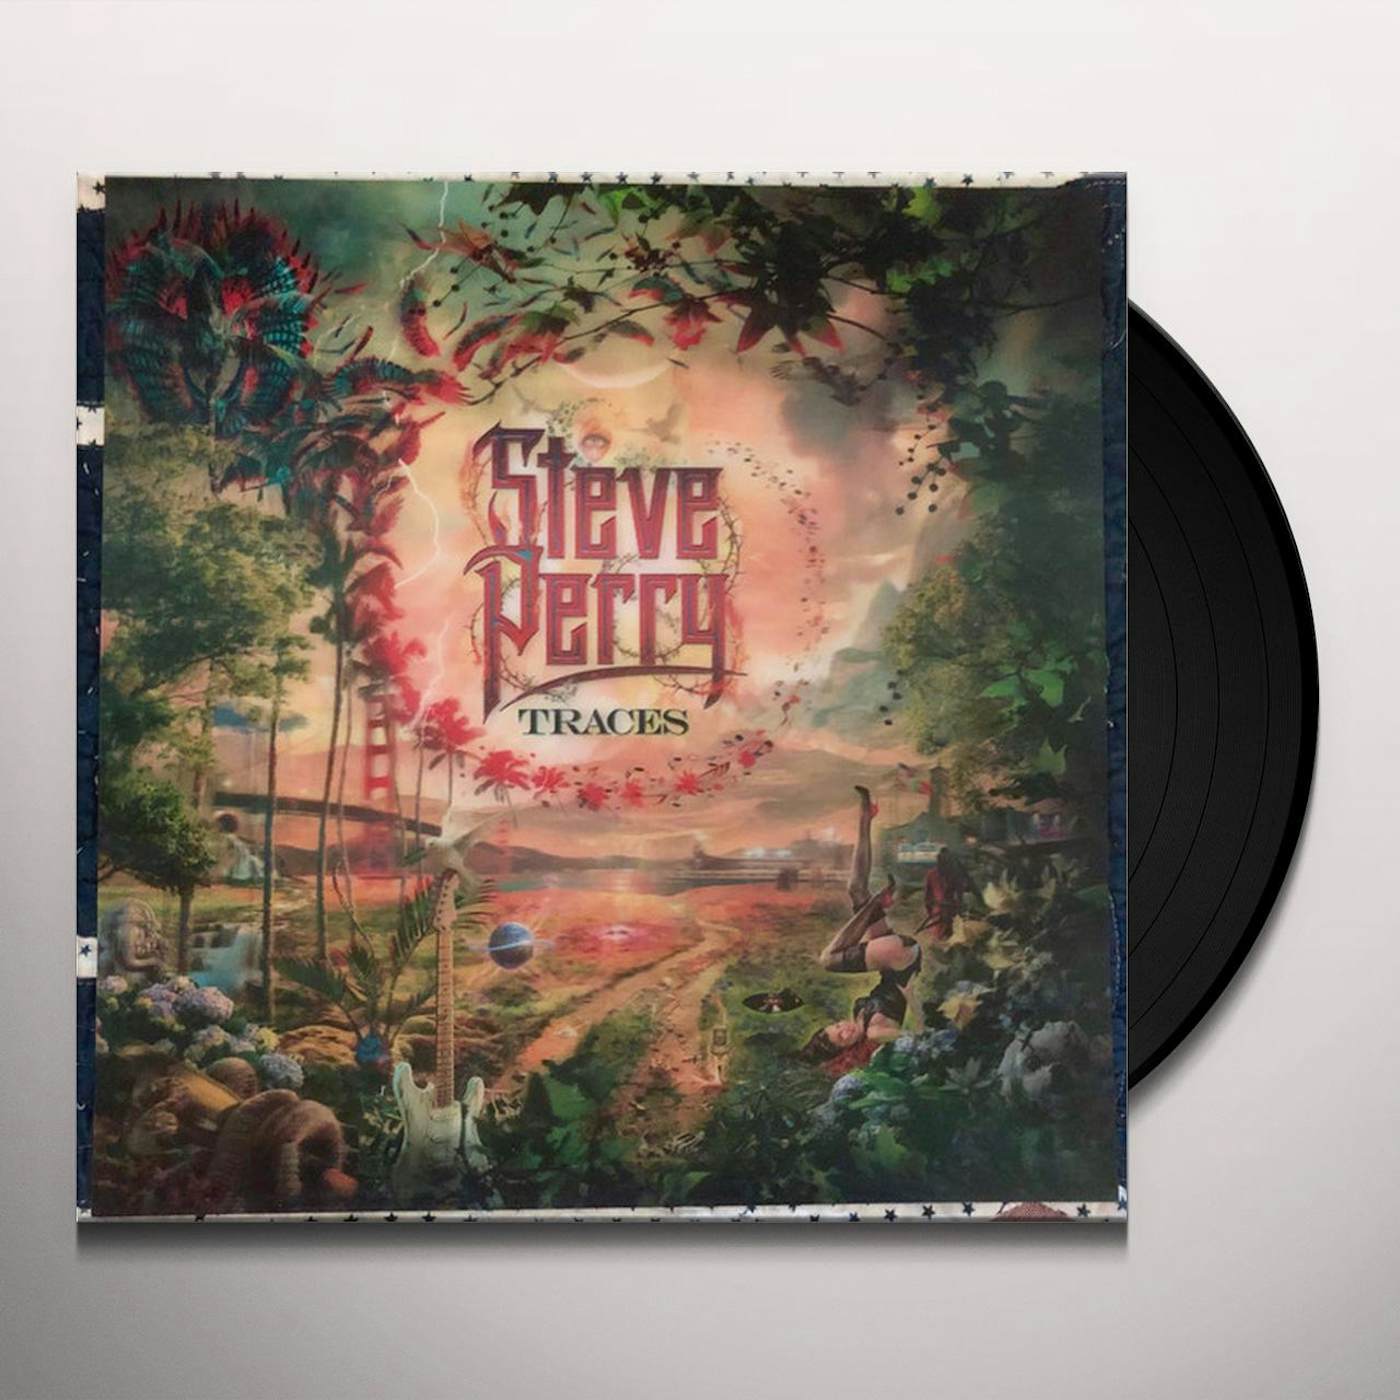 Steve Perry TRACES (DELUXE/2 LP LENTICULAR) Vinyl Record